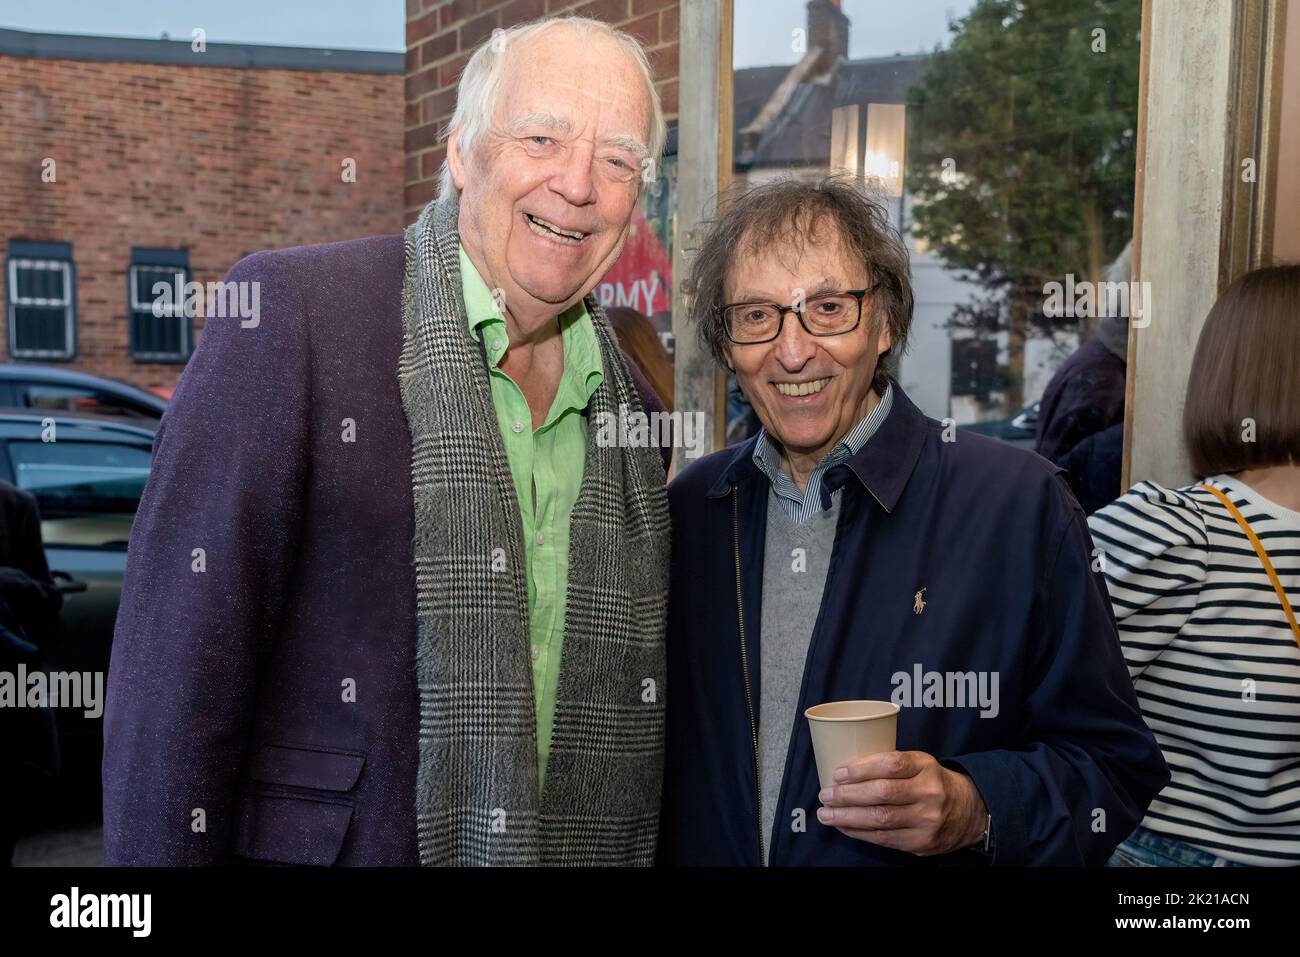 Tim Rice and Don Black arrive at the Playground Theatre for the last night of Rehab the Musical. Rehab The Musical, a pop-tactic, rock-bottom-to-redemption journey of the soul starring Keith Allen played at The Playground Theatre in London September the 1st to the 17th.Clive Black for Blacklist Entertainment presents Rehab the musical & the team includes: Book by Elliot Davis, music & lyrics by Grant Black & Murray Lachlan Young, Director & choreographer - Gary Lloyd, Co- Producer Don Black The New Musical attracted some high profile visitors to watch and support the show including Damien Hi Stock Photo